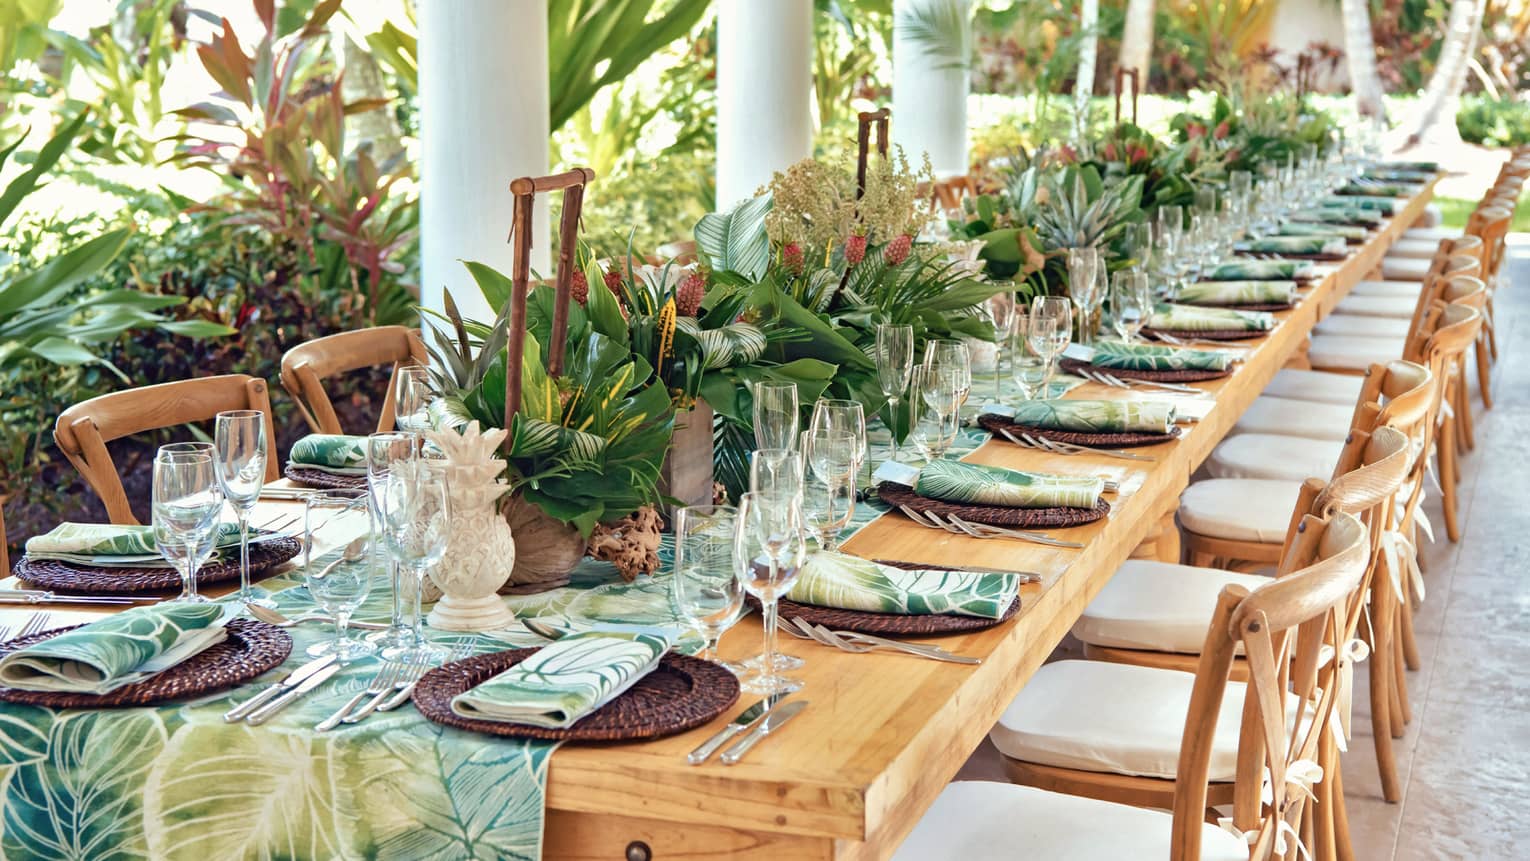 Versailles outdoor terrace with a set table with a green leafy runner and napkins 